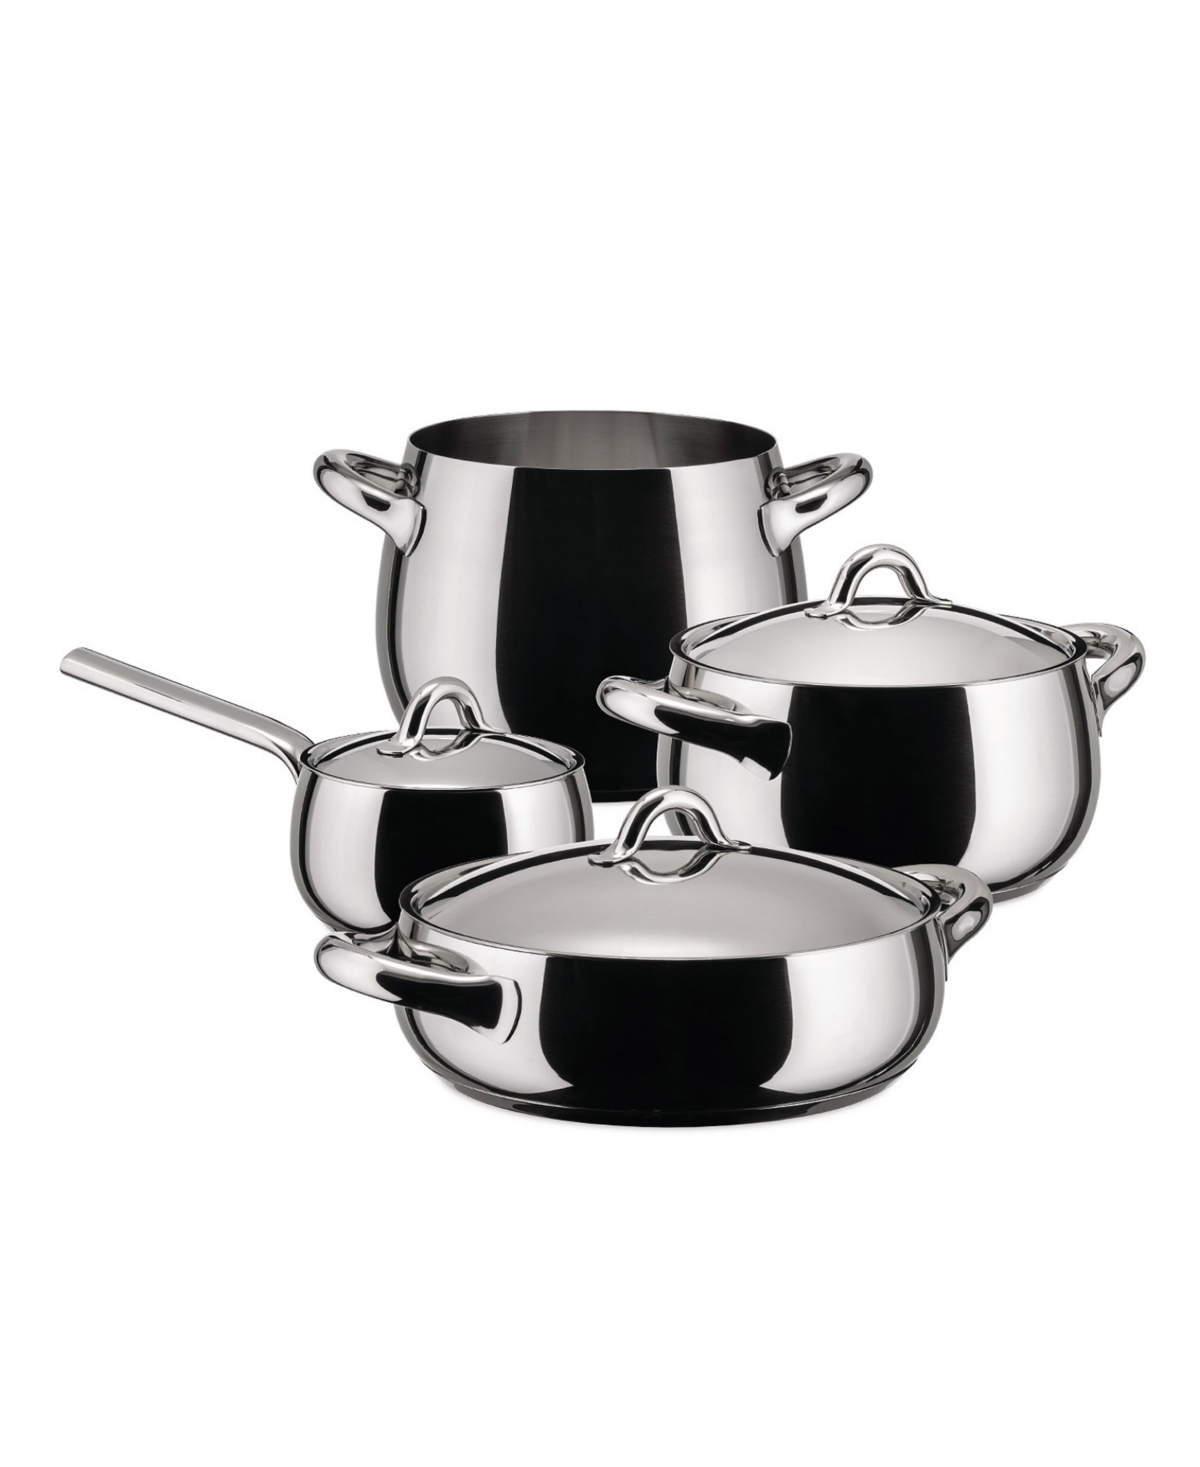 Alessi Mami Stainless Steel 7 Pc Cookware Set